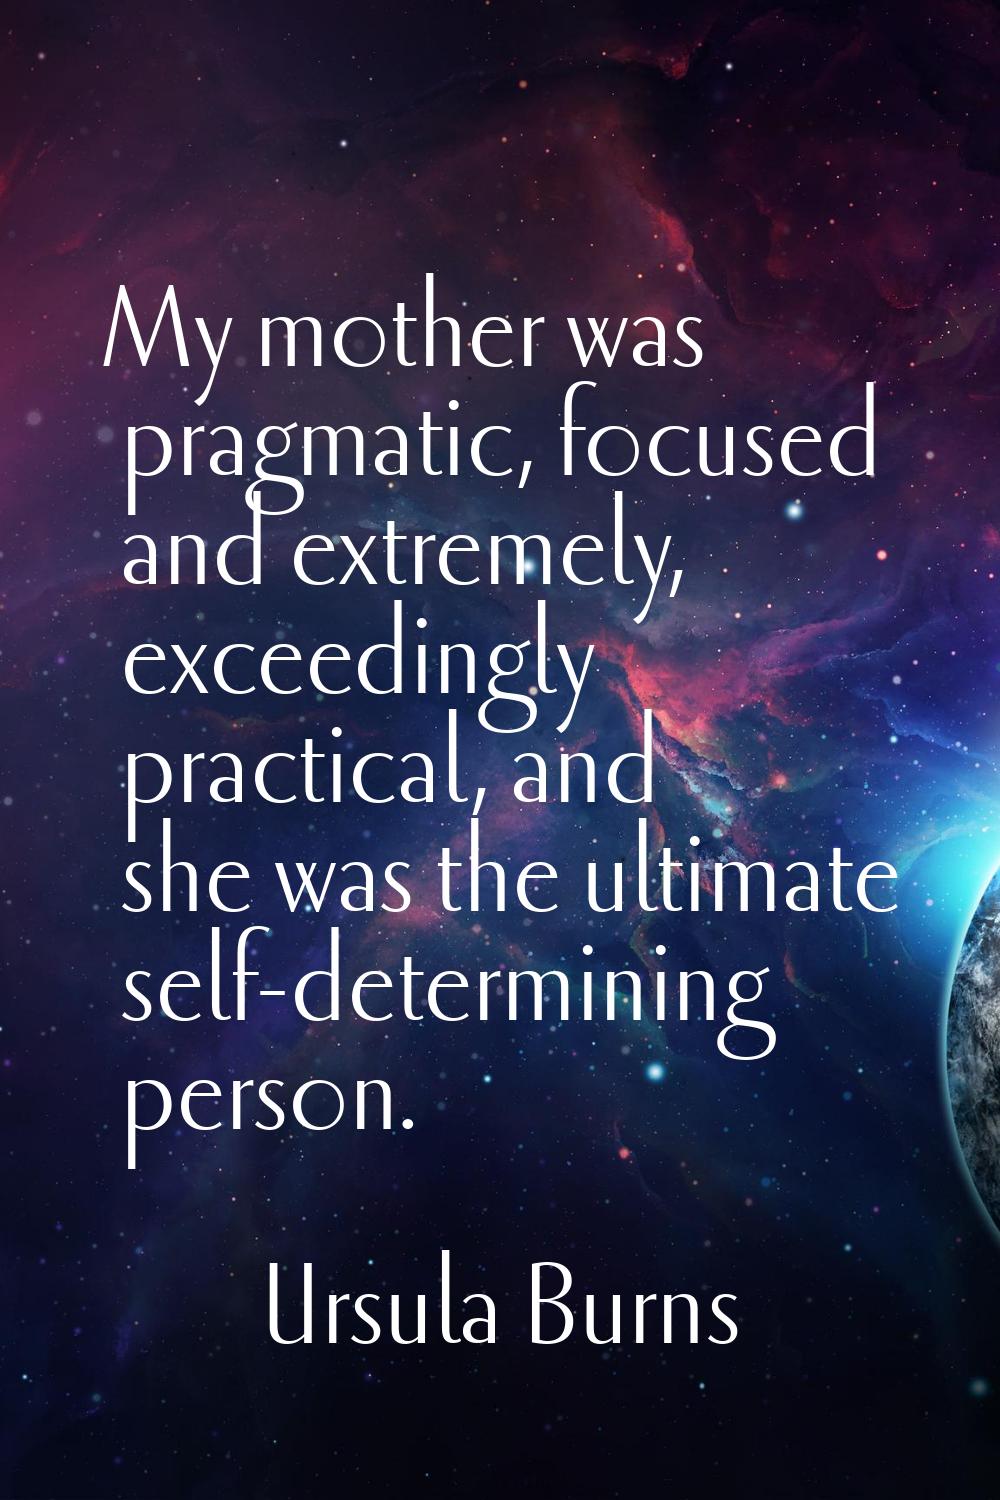 My mother was pragmatic, focused and extremely, exceedingly practical, and she was the ultimate sel